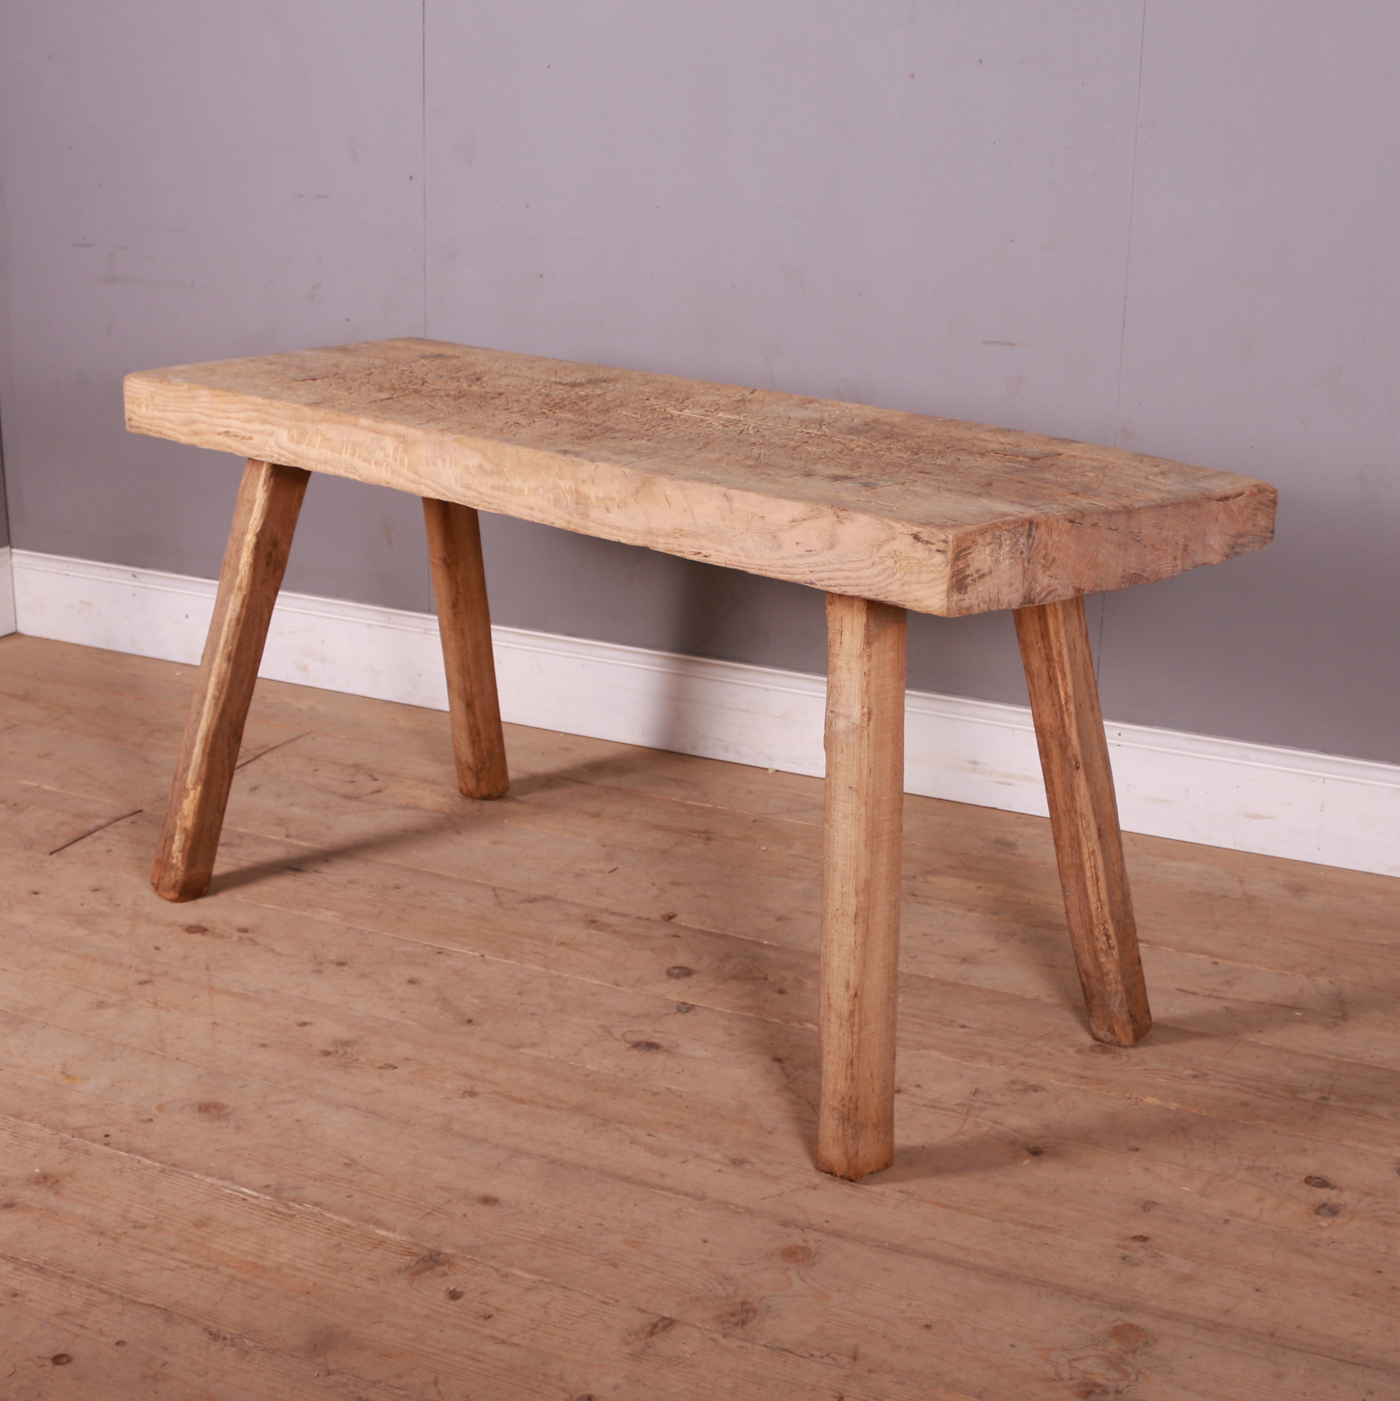 French Scrubbed Sycamore and Elm Trestle Table